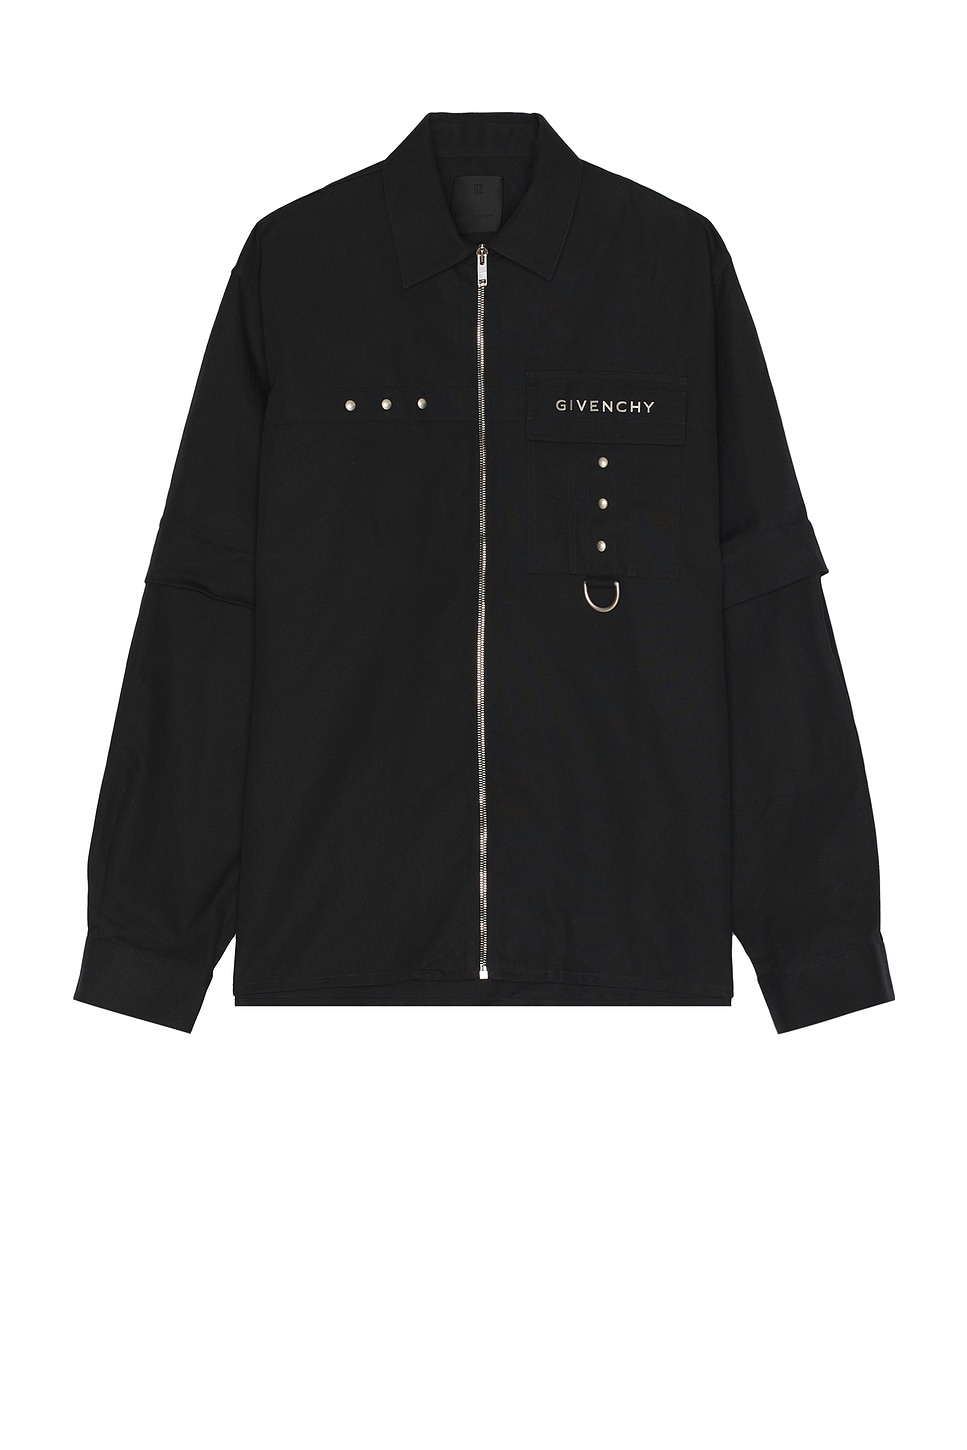 Image 1 of Givenchy Hardware Shirt in Black